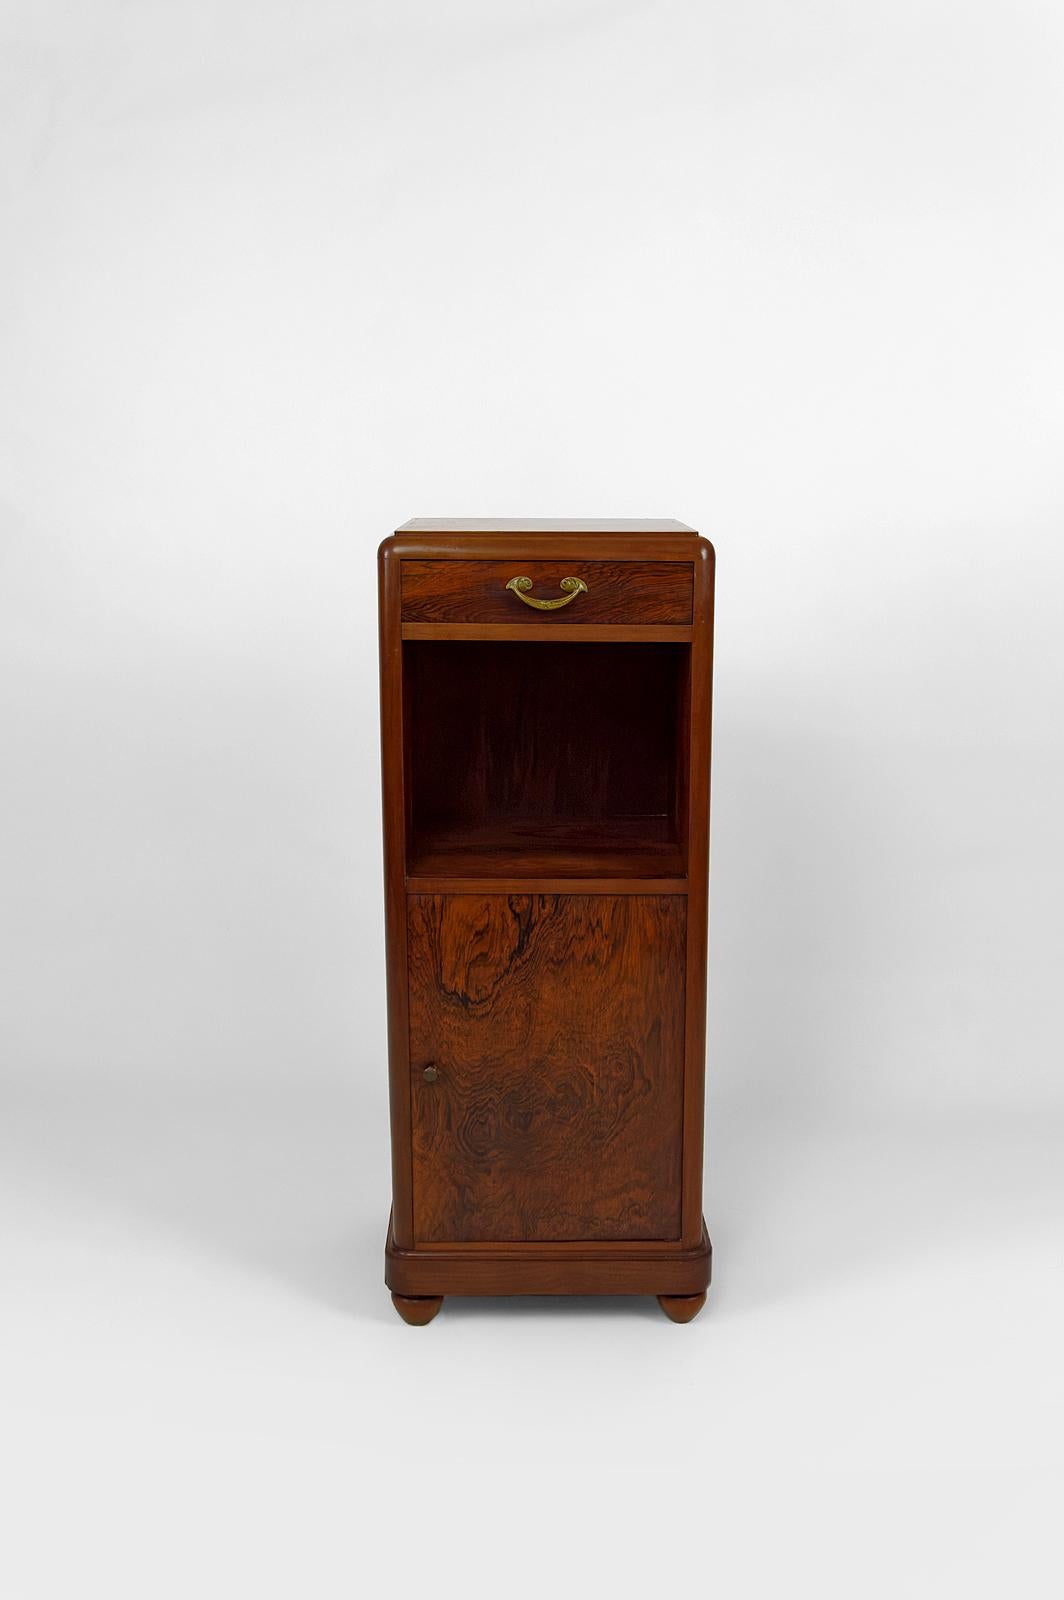 French Art Nouveau Nightstand by Louis Majorelle, circa 1910